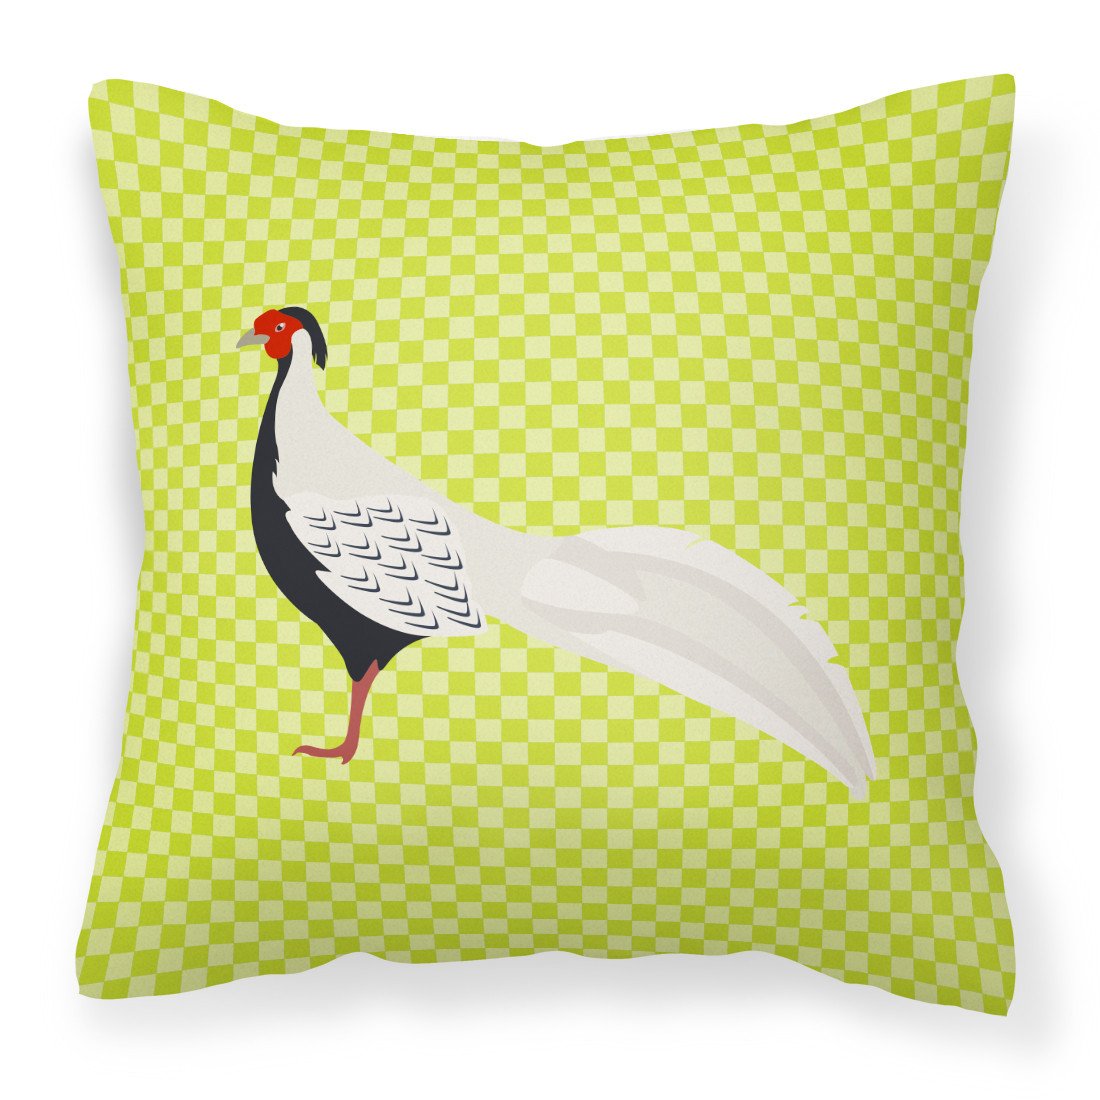 Silver Pheasant Green Fabric Decorative Pillow BB7755PW1818 by Caroline's Treasures